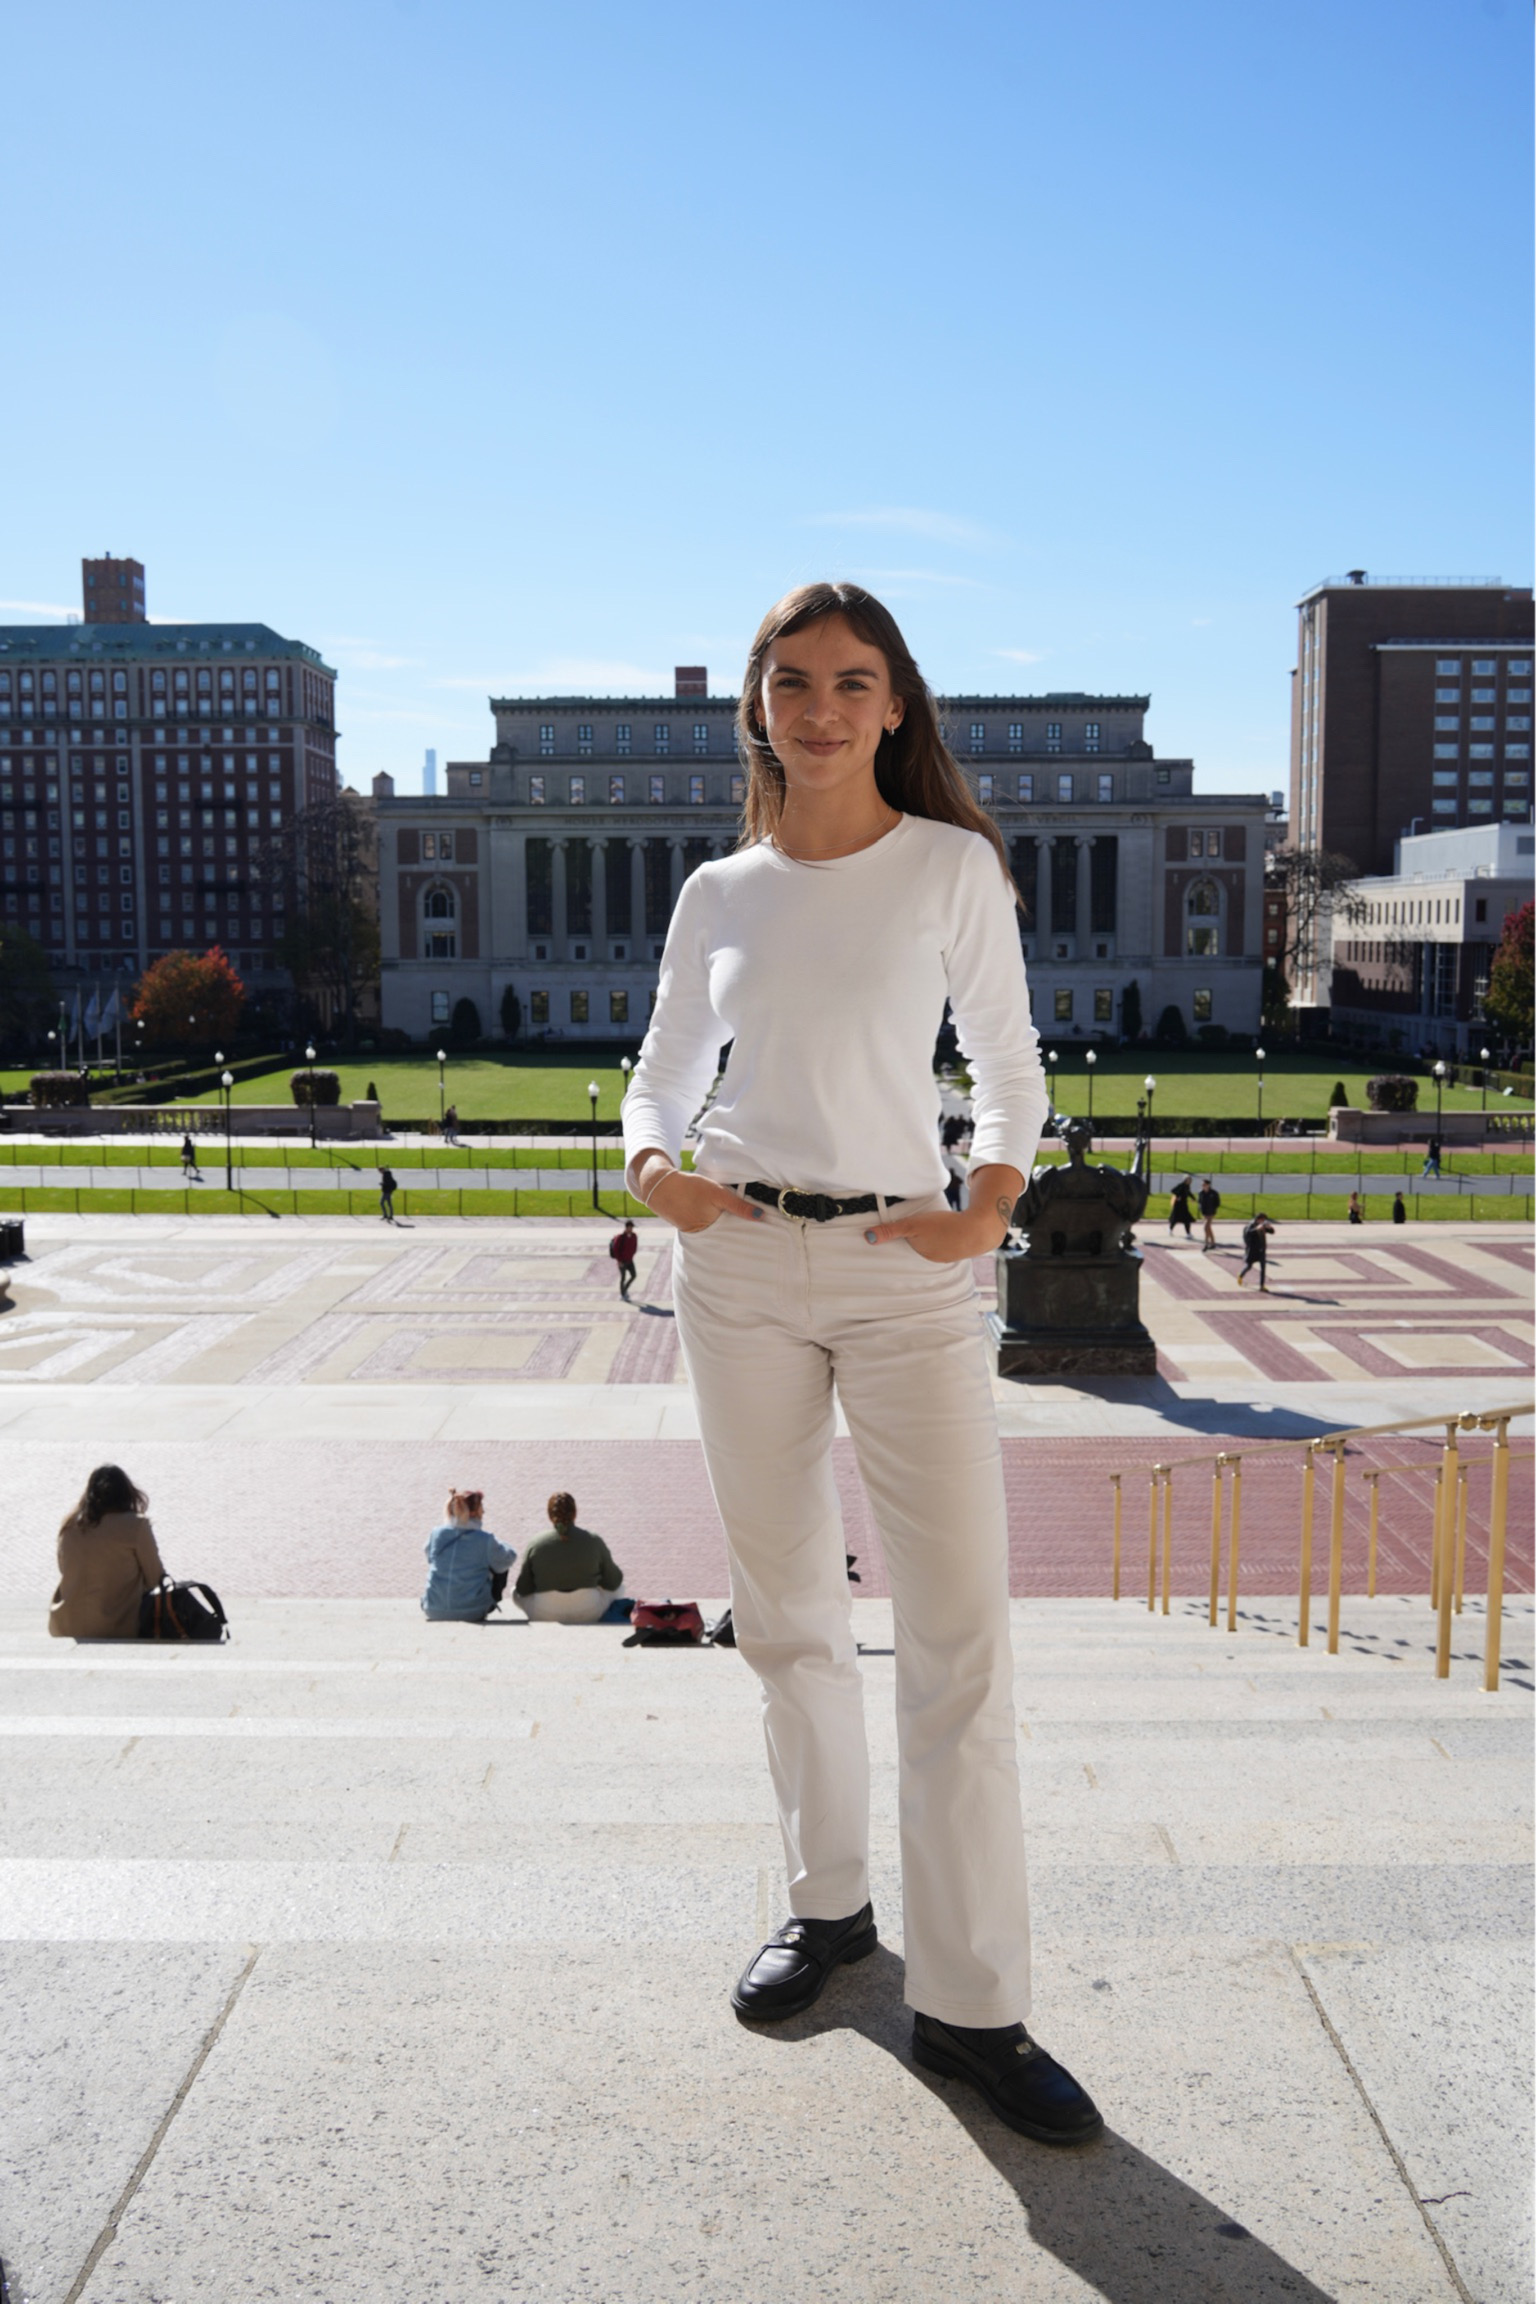 All in the Family: One Environmental Science and Policy Student’s Path to Columbia